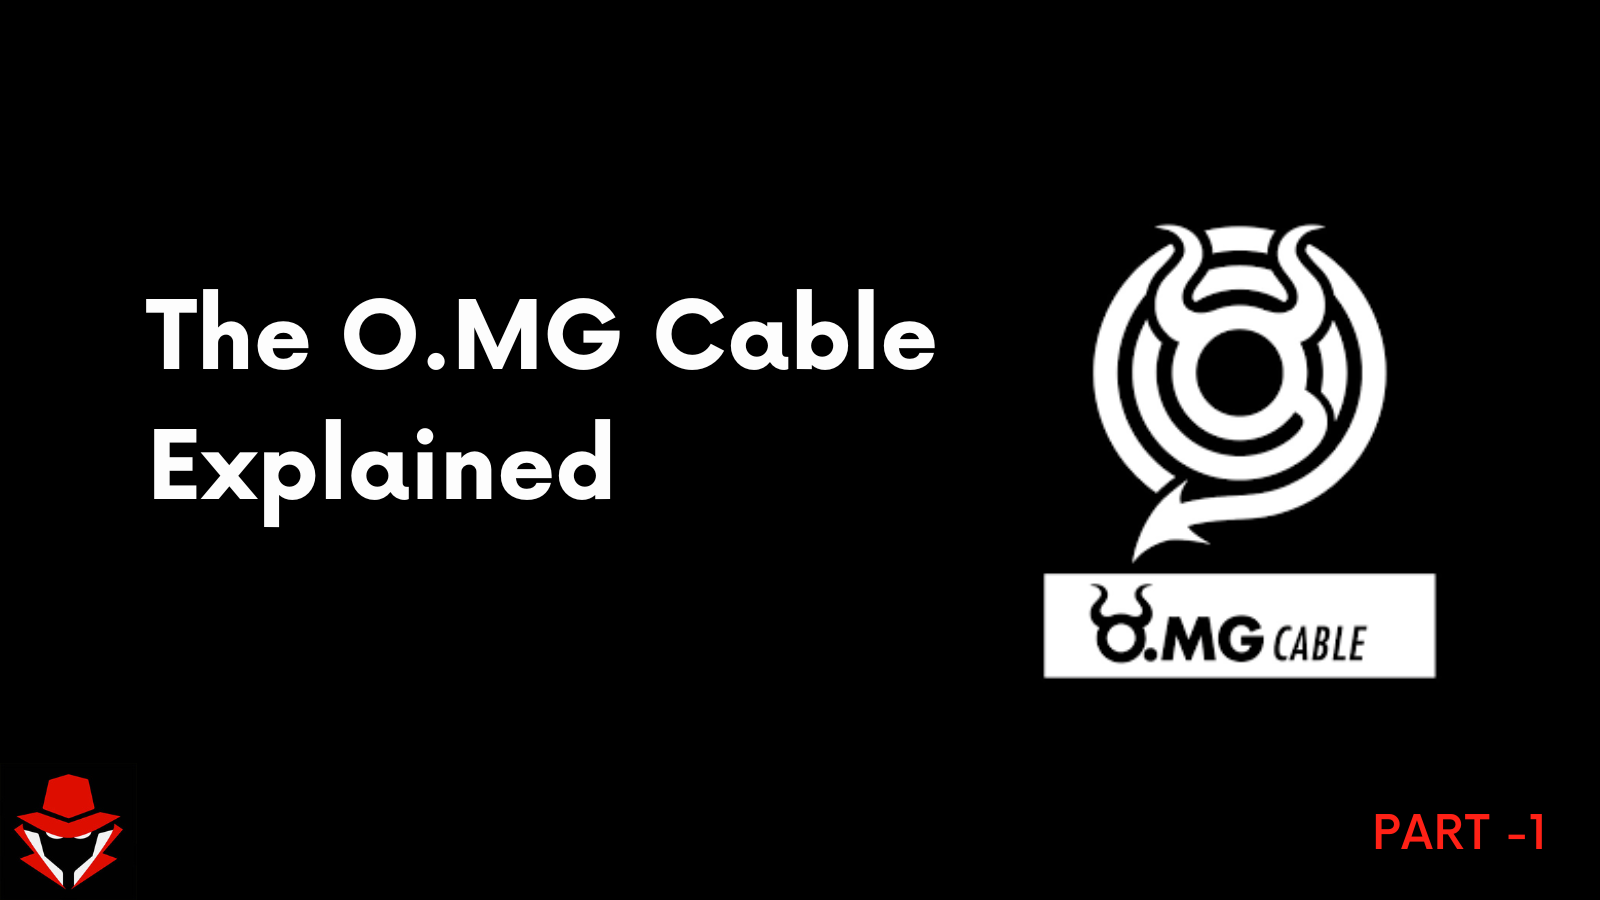 The O.MG Cable Explained image